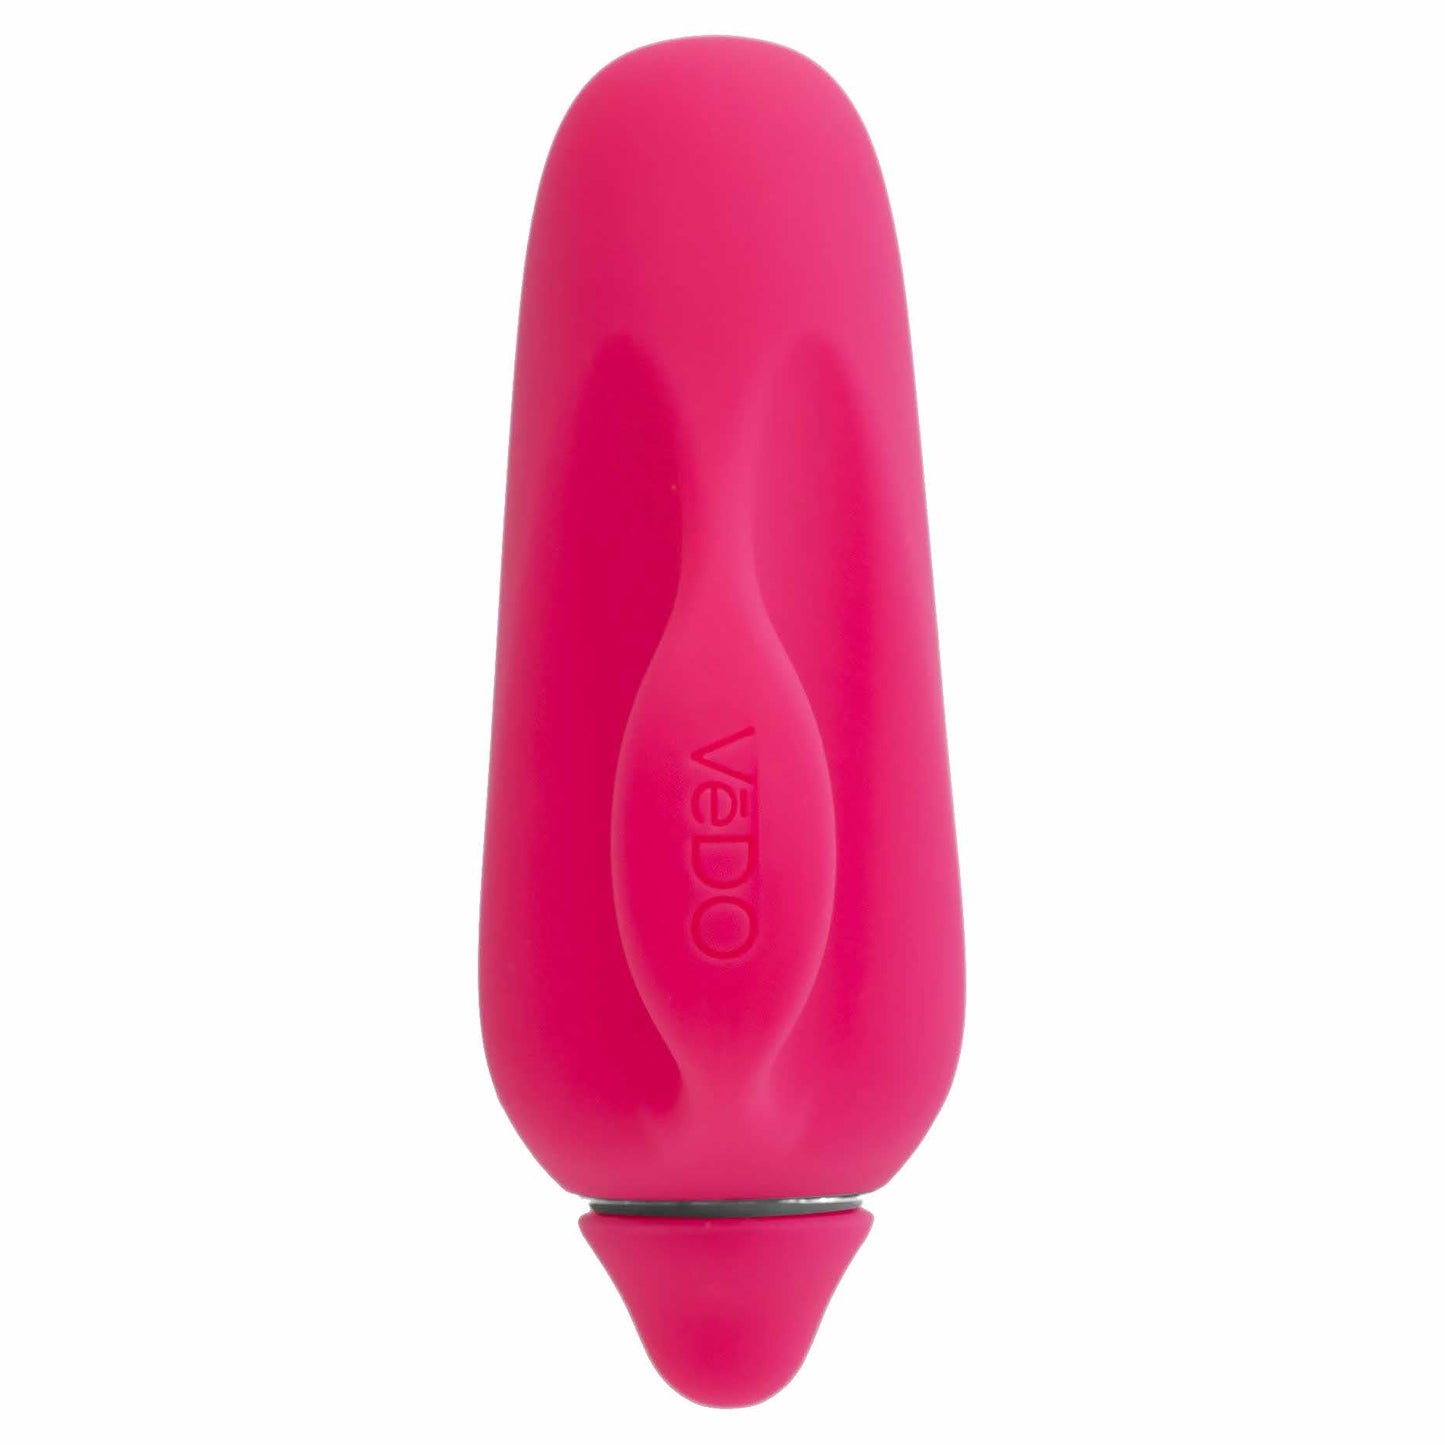 front view of the vedo vivi rechargeable 3.5" finger vibe savvi-f0809 foxy pink